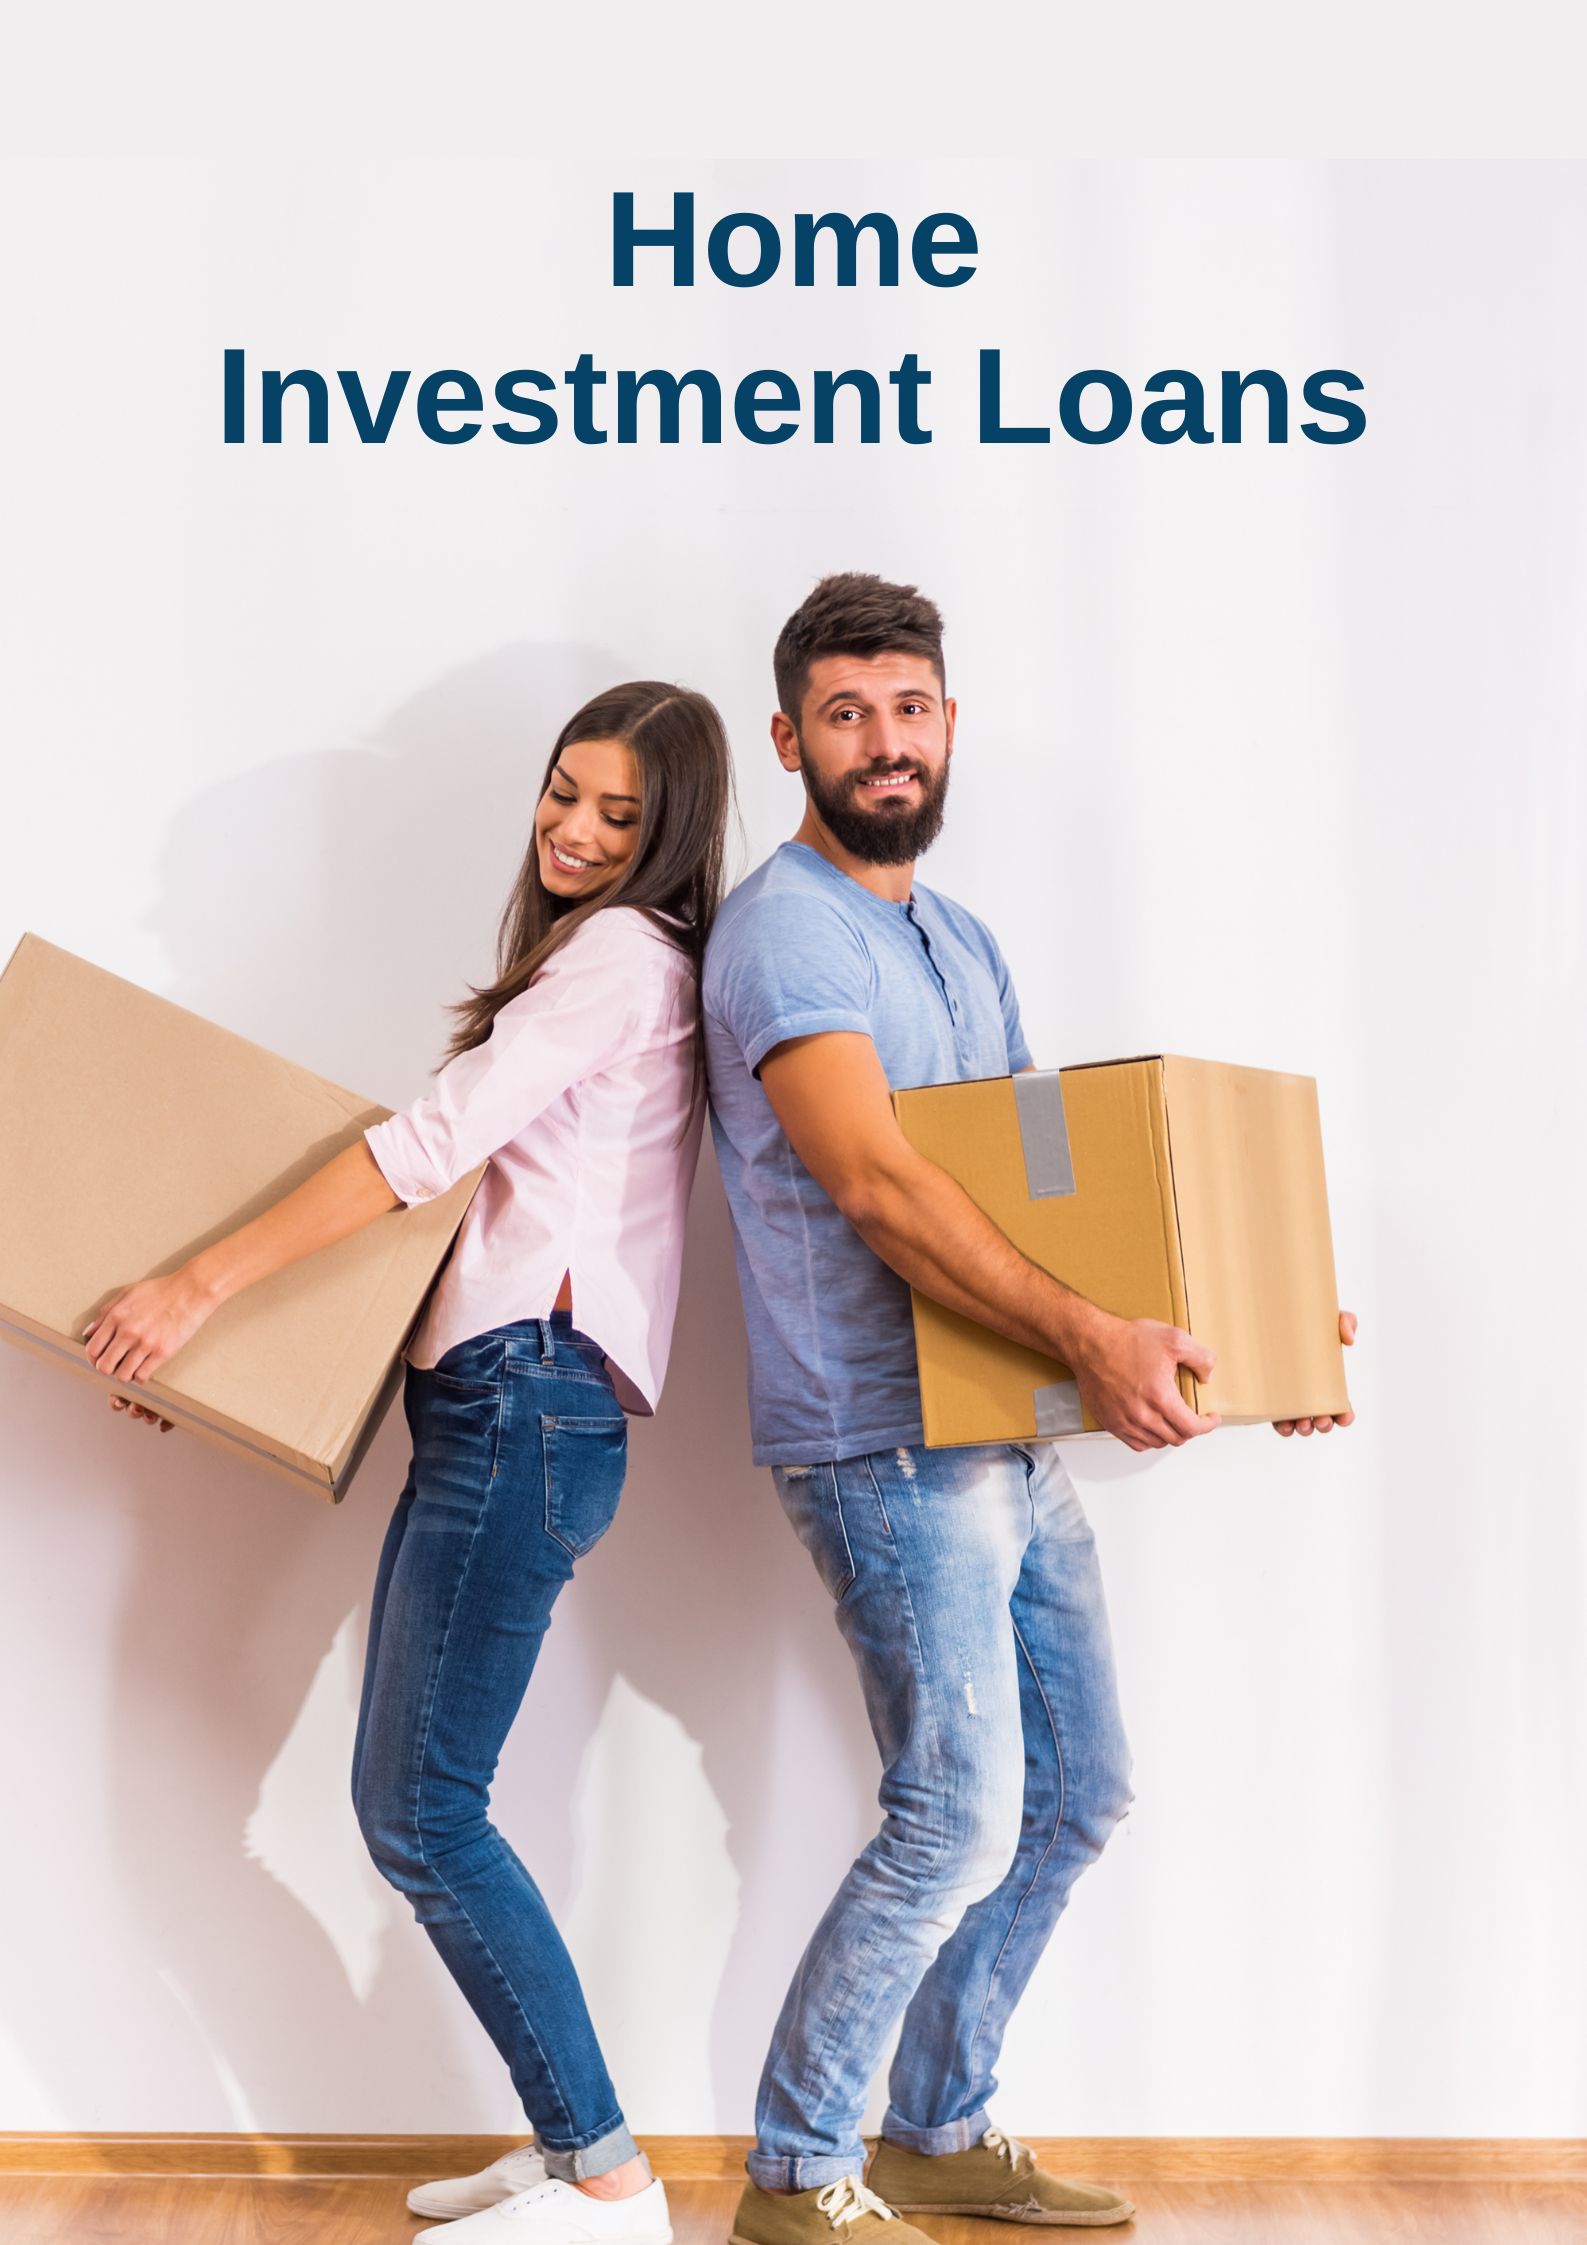 Home/Investment Loans